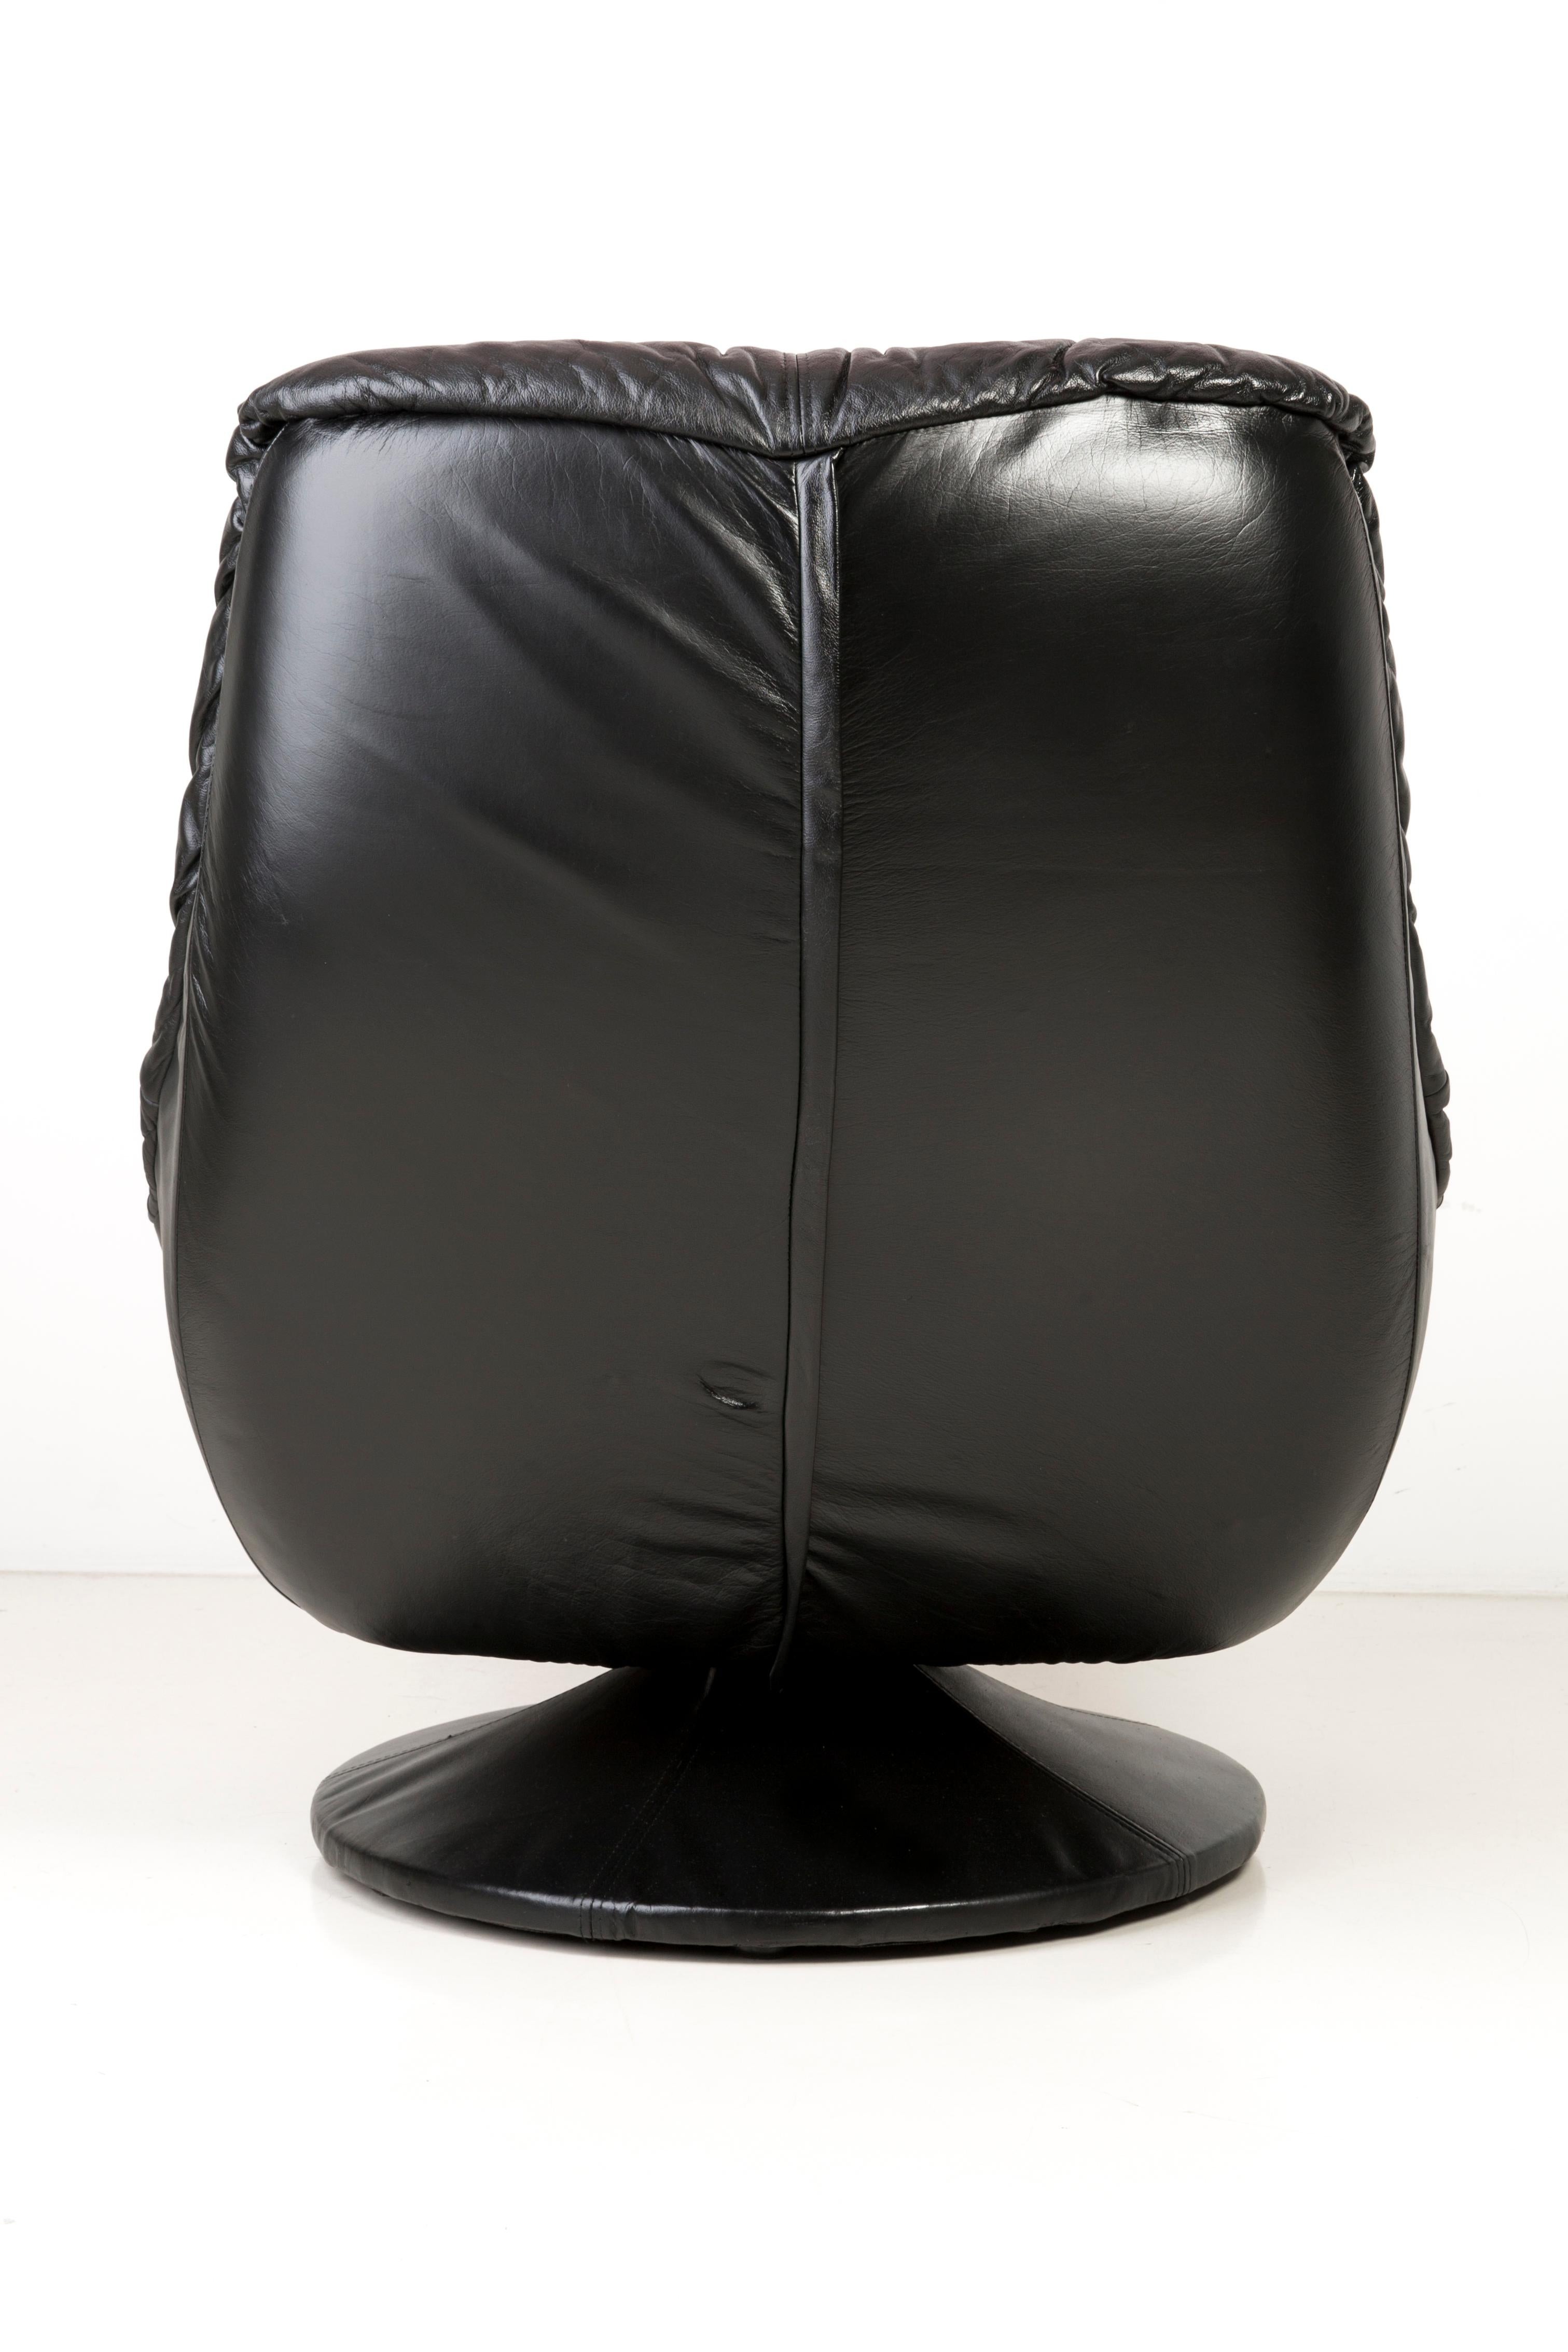 Mid-Century Modern 20th Century Vintage Black Soft Leather Swivel Armchair, Italy, 1960s For Sale